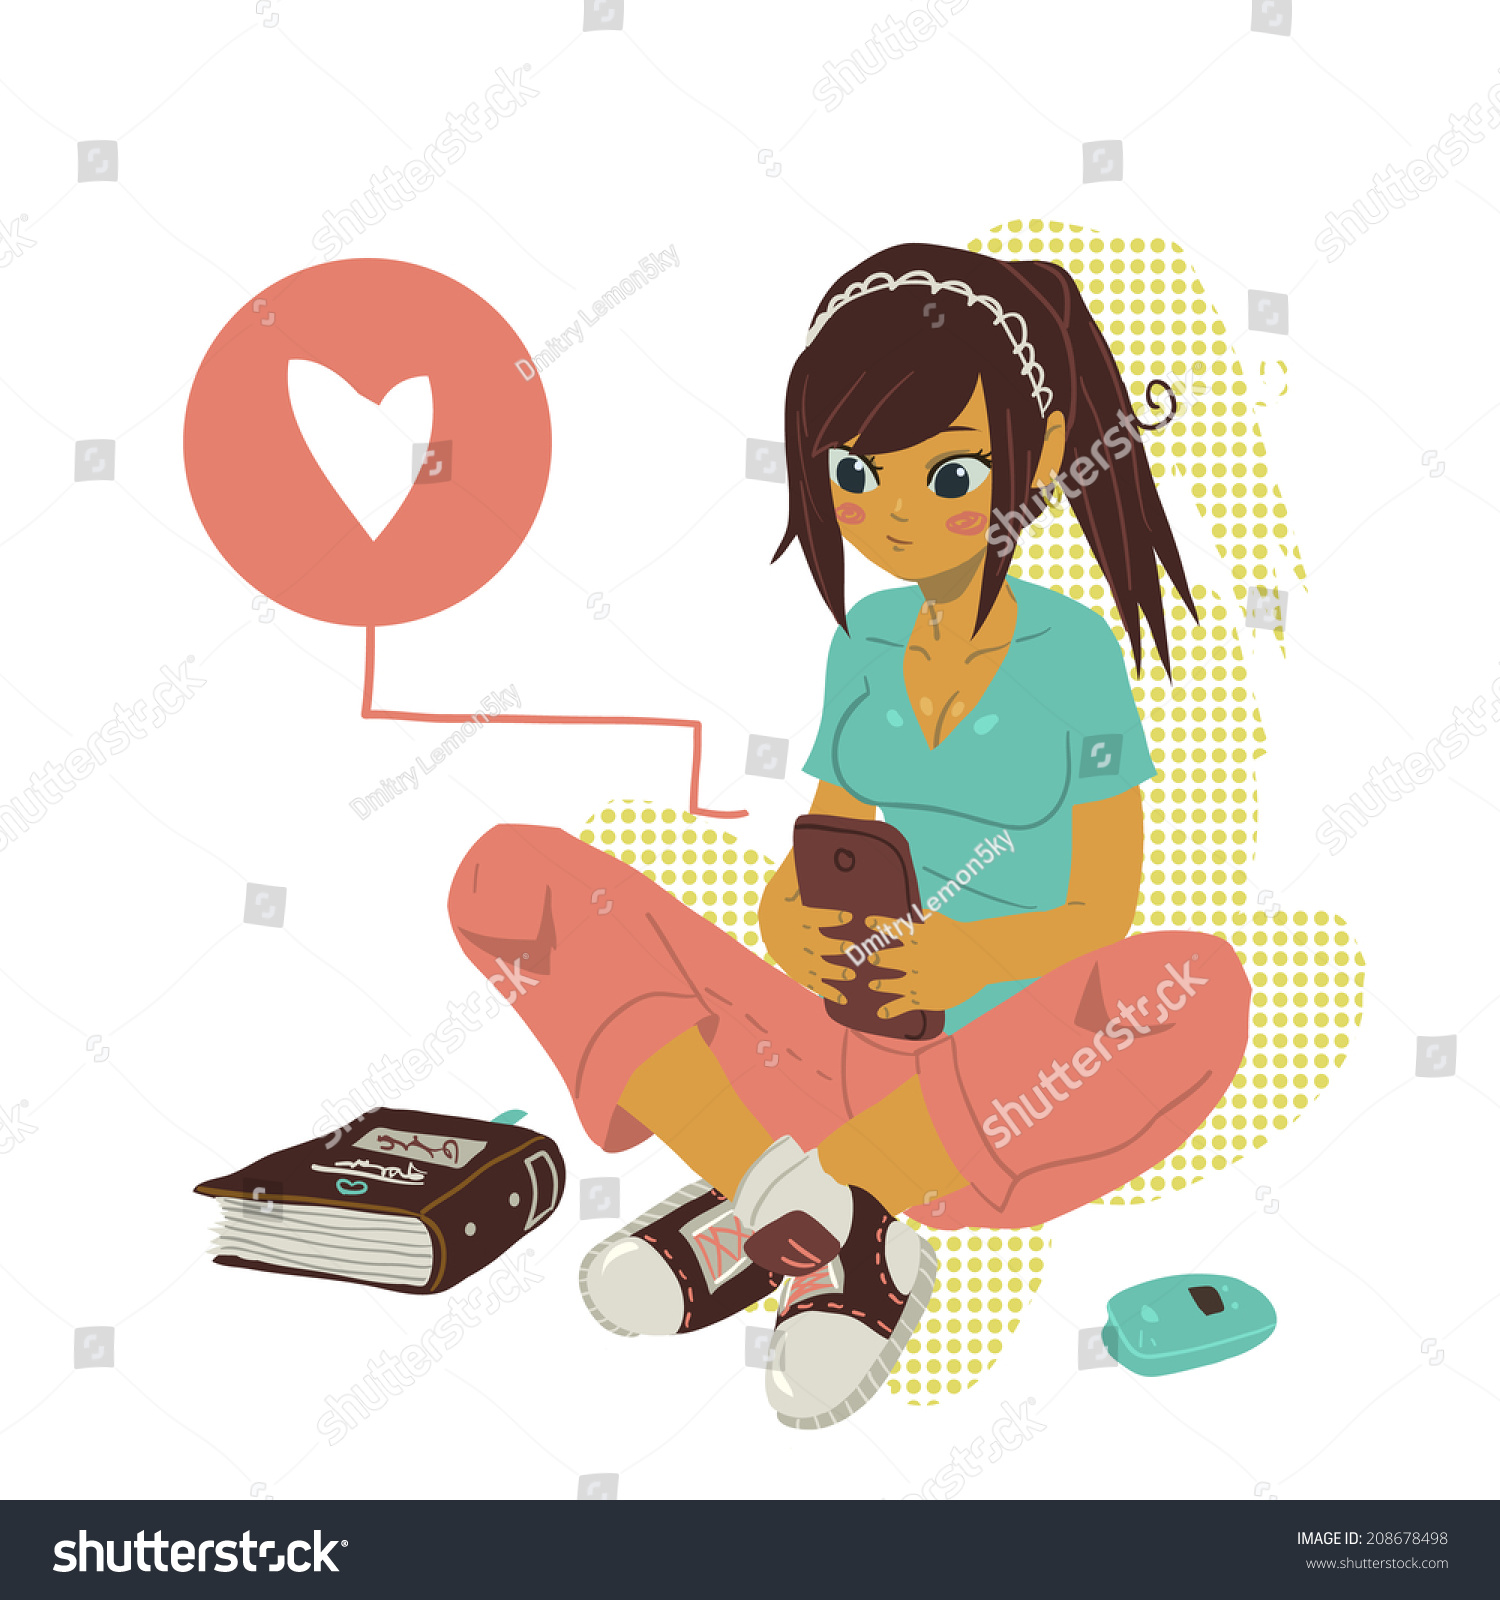 girl texting clipart - photo #21